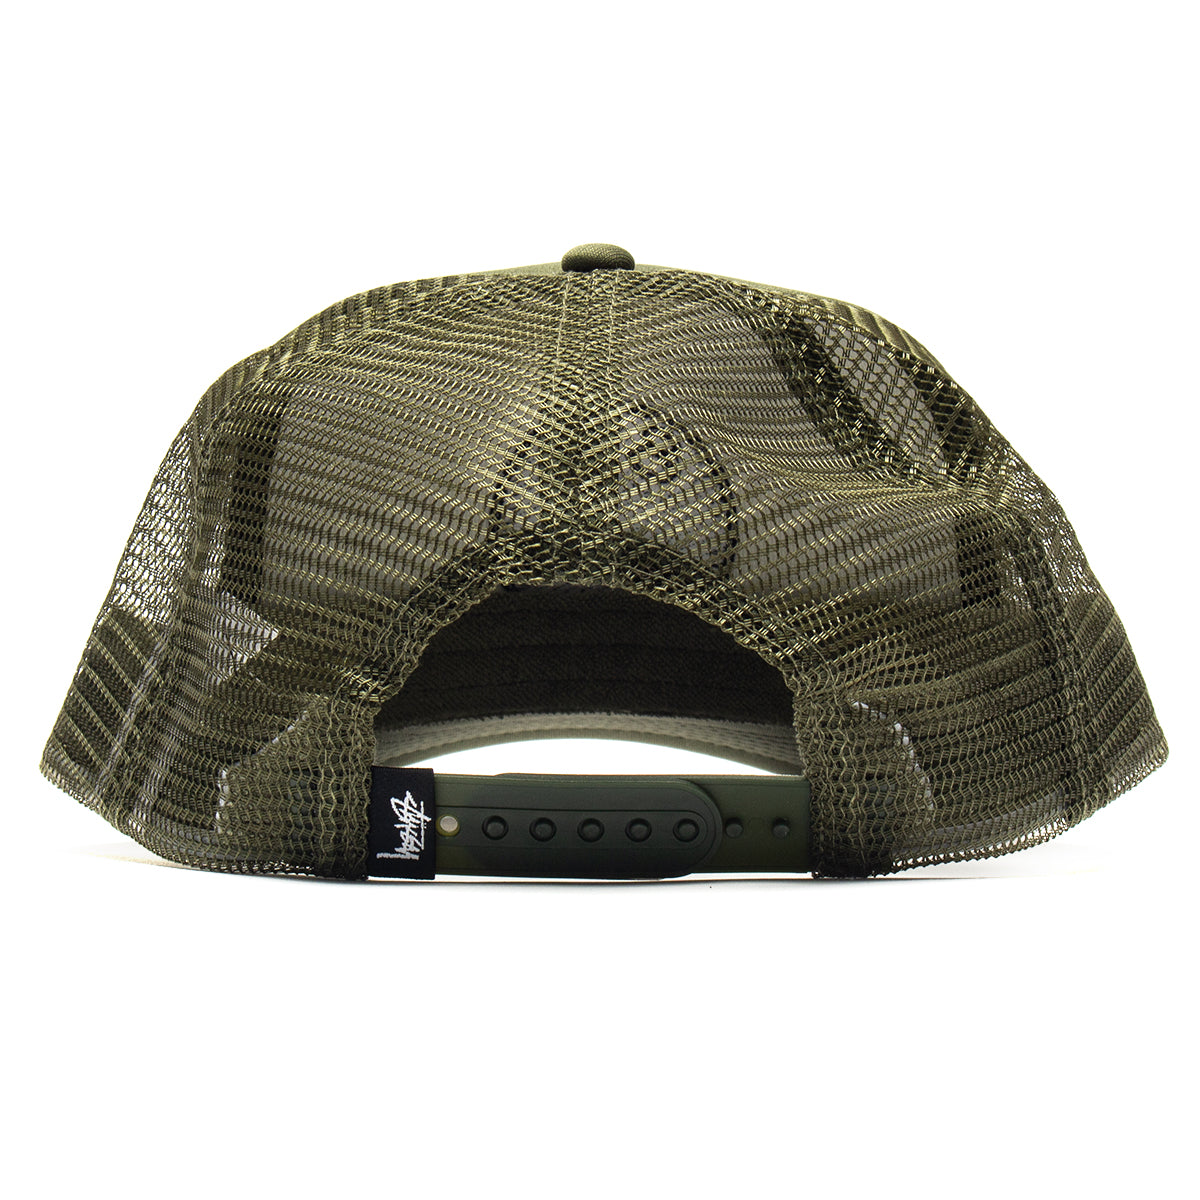 Stussy | 8-Ball Trucker Cap Style # 1311089 Color : Olive